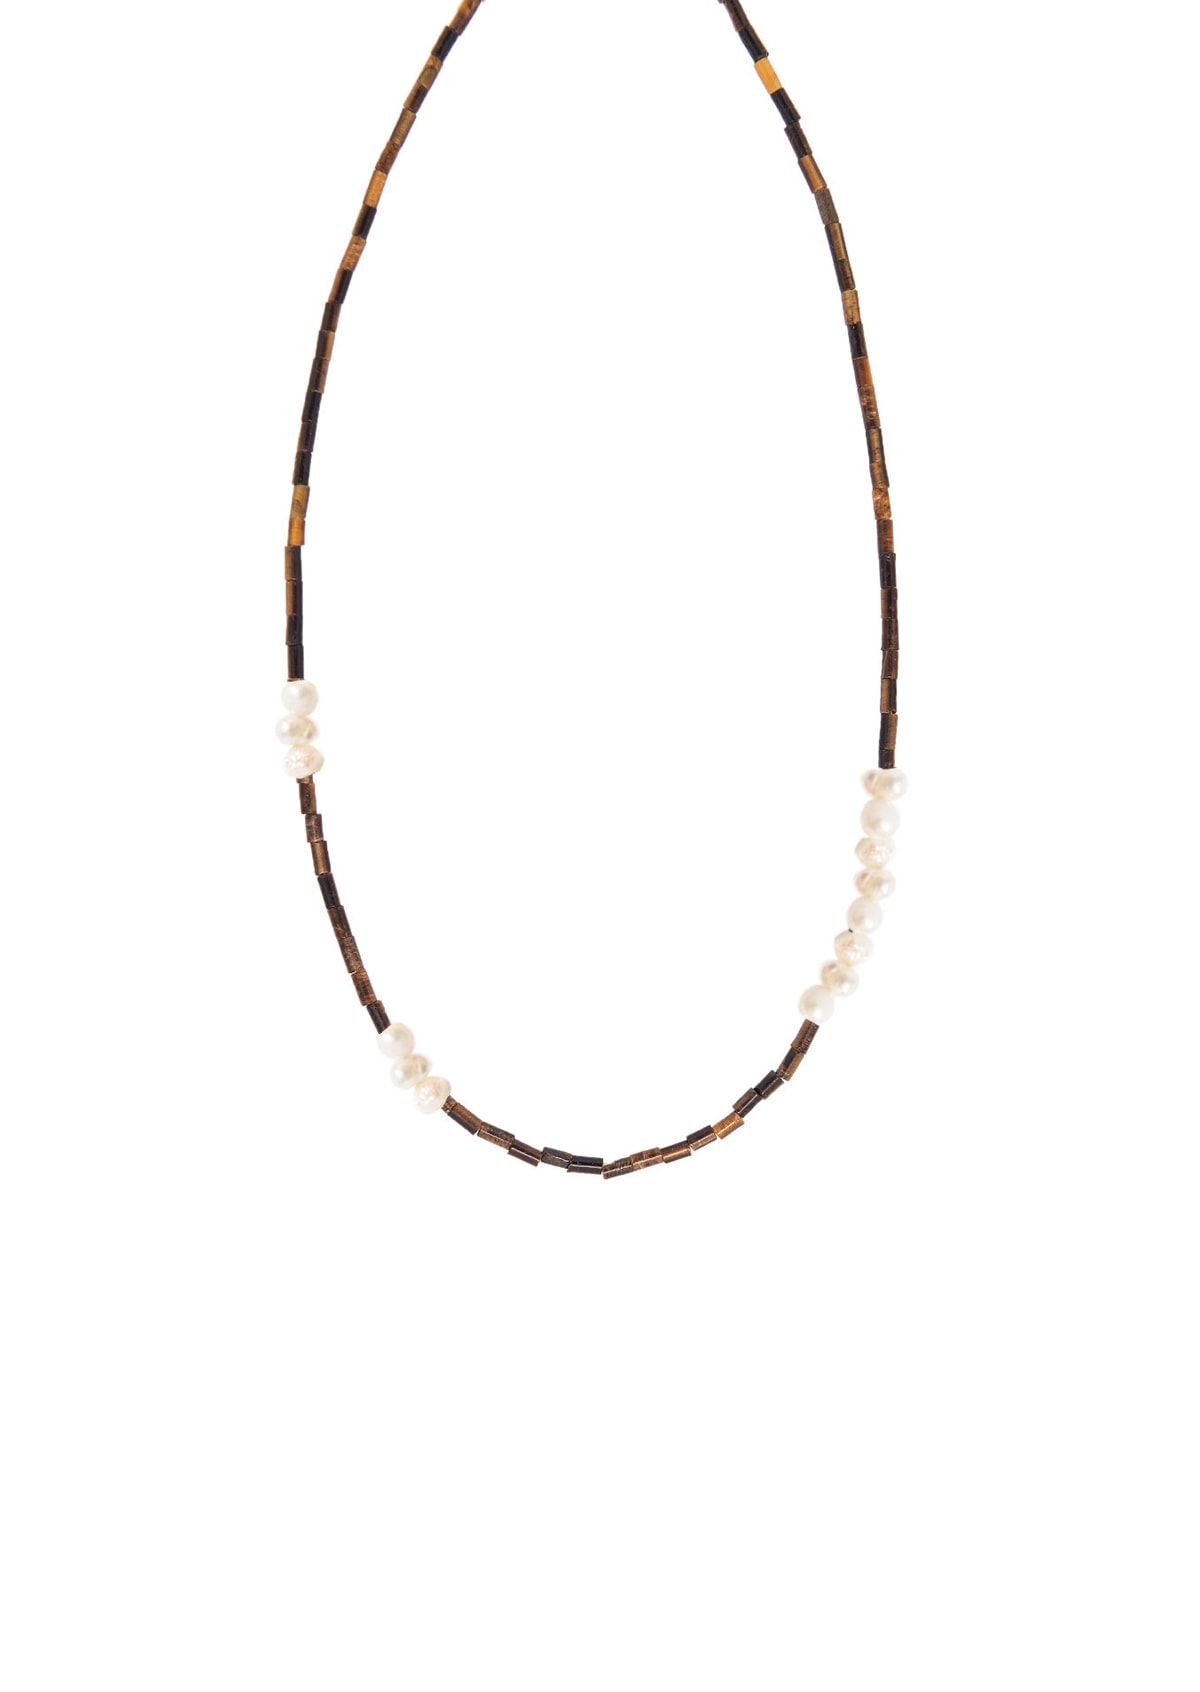 Tiger Eye Pearl Necklace